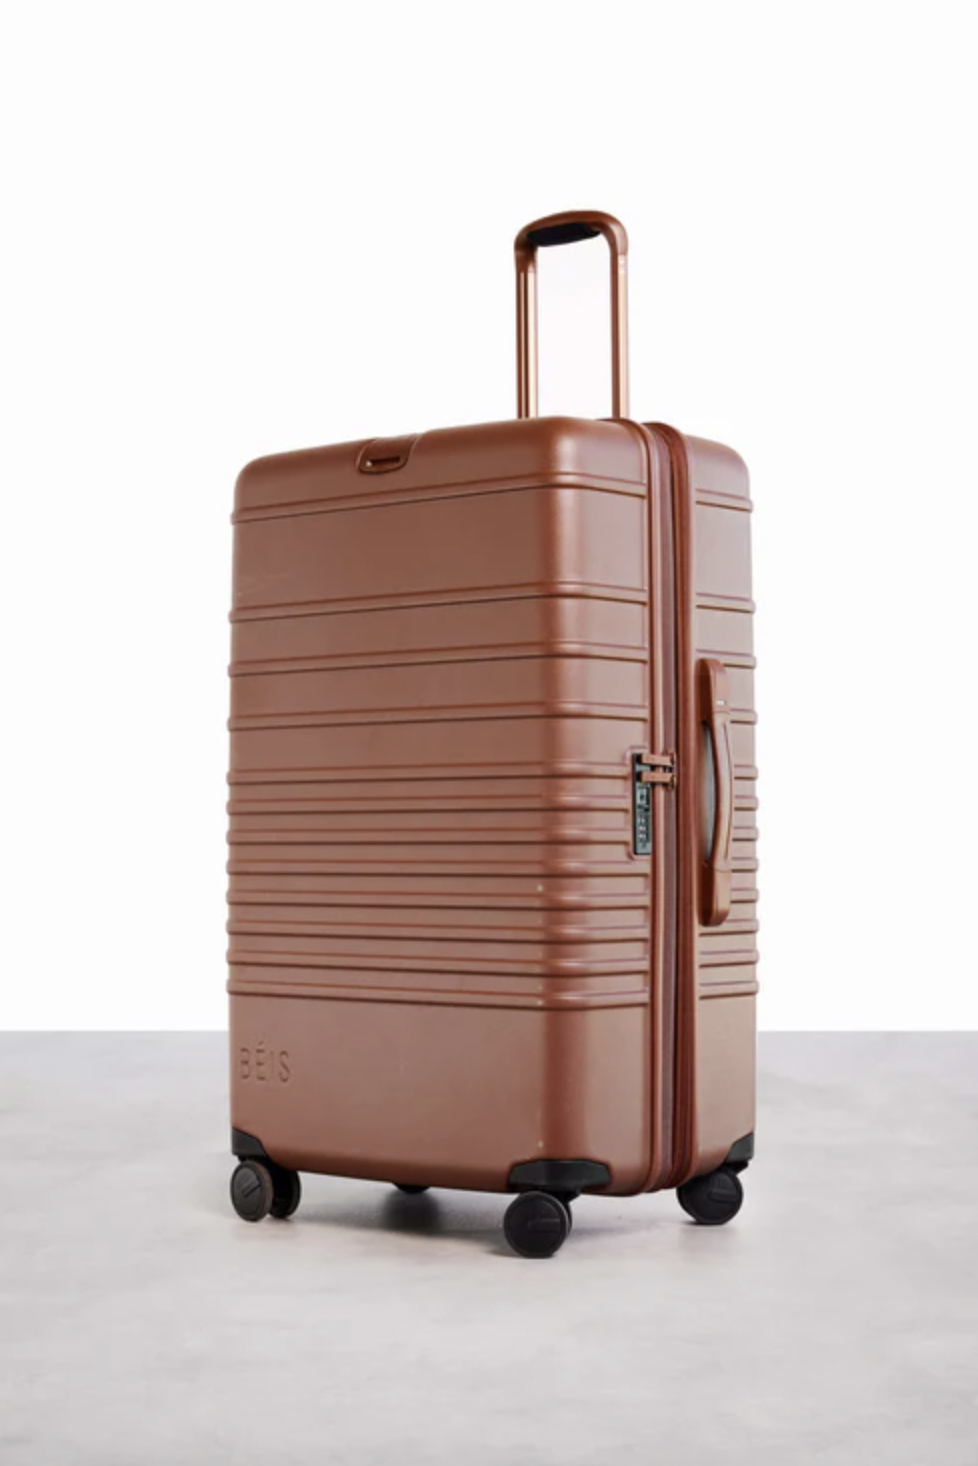 Beis Luggage in Maple